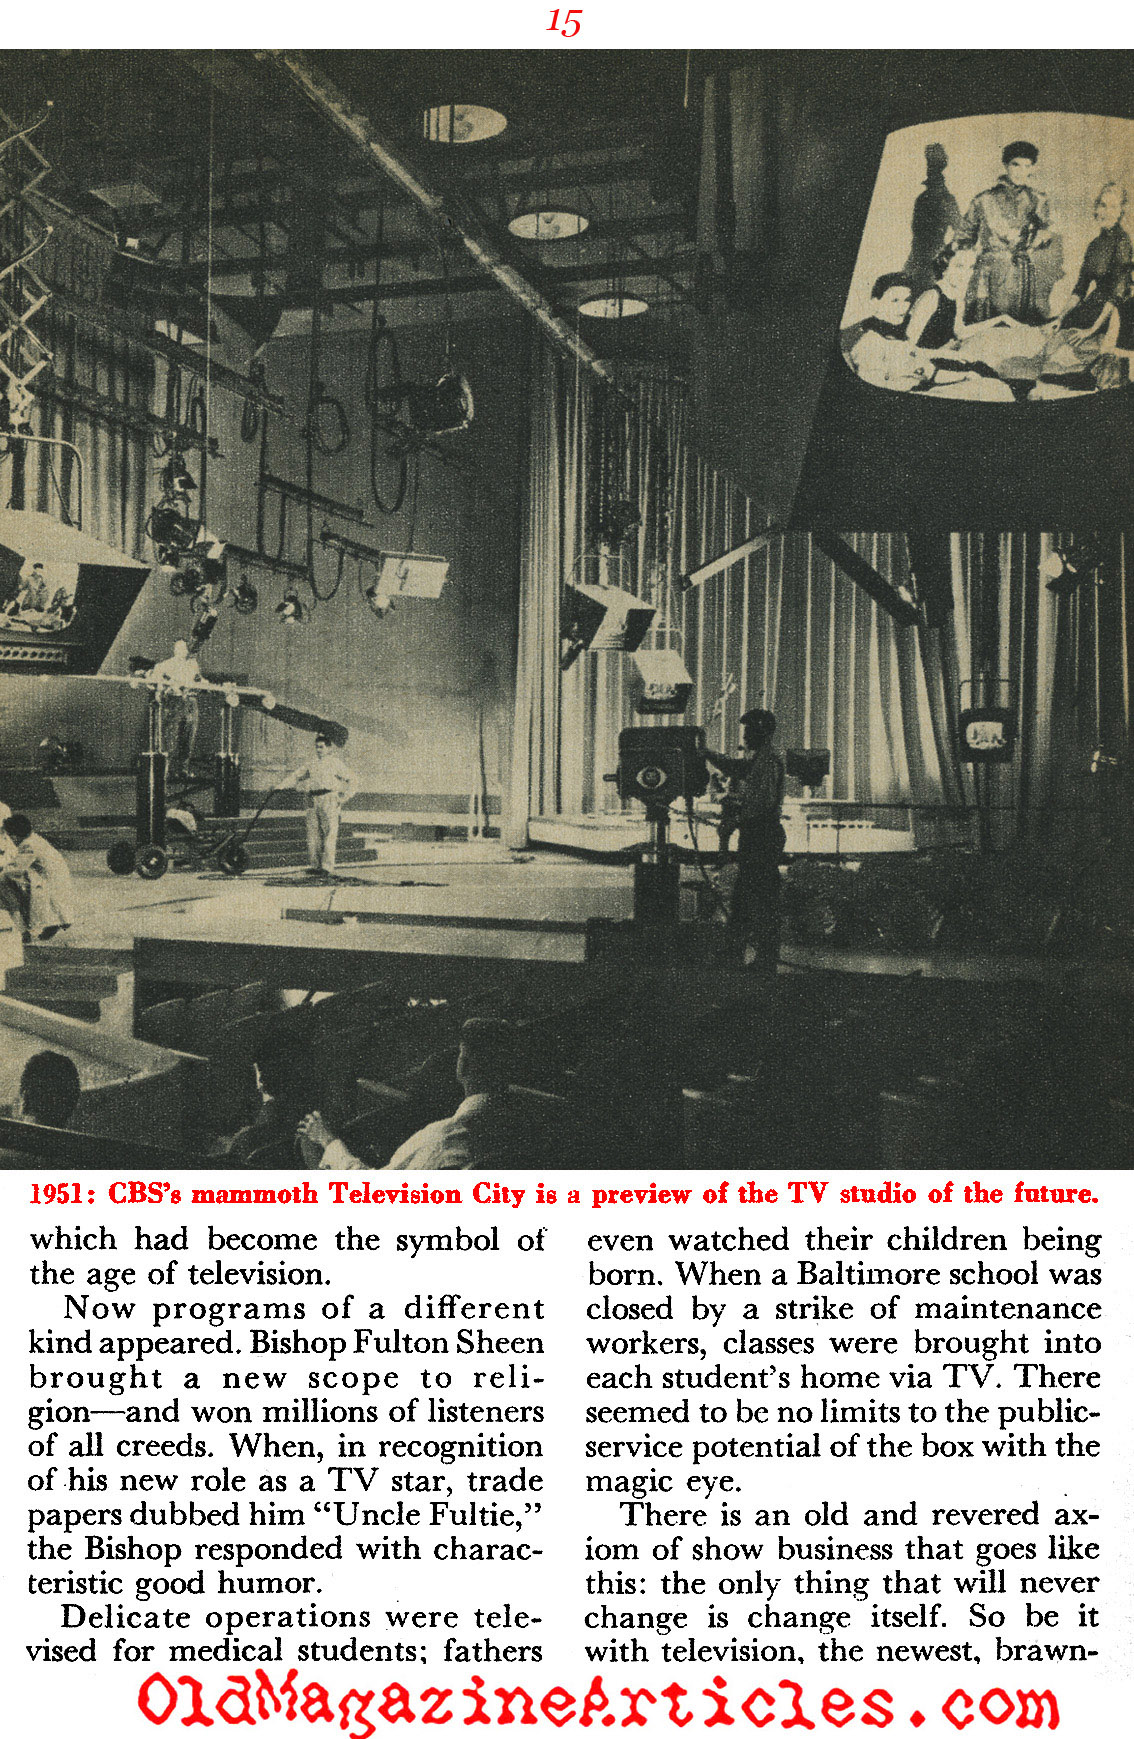 The First Thirty Years of Television (Coronet Magazine, 1954)